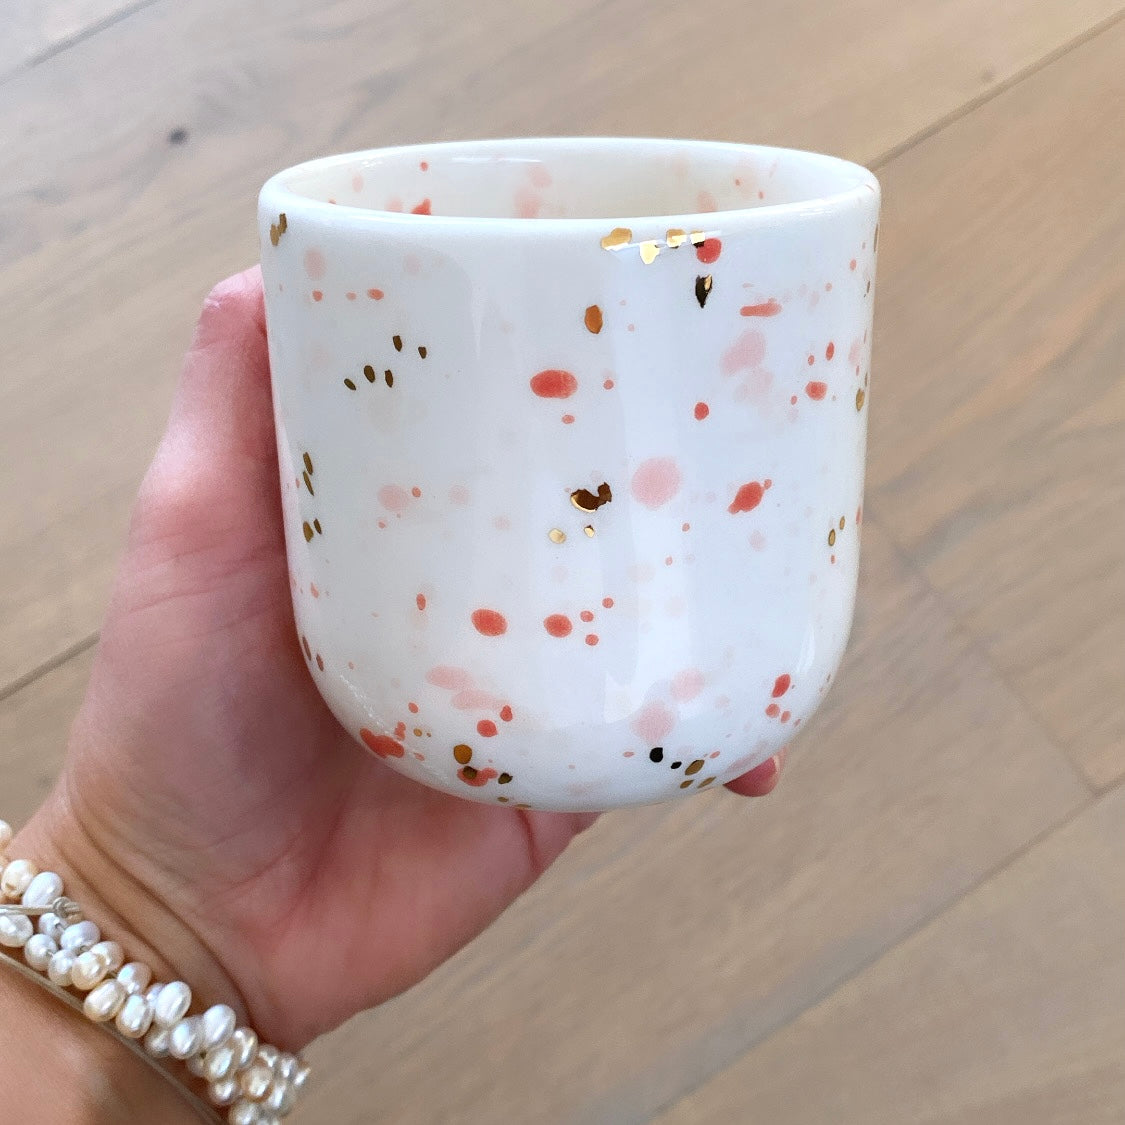 Marinski Heartmade latte cup speckles - coral, pink and gold